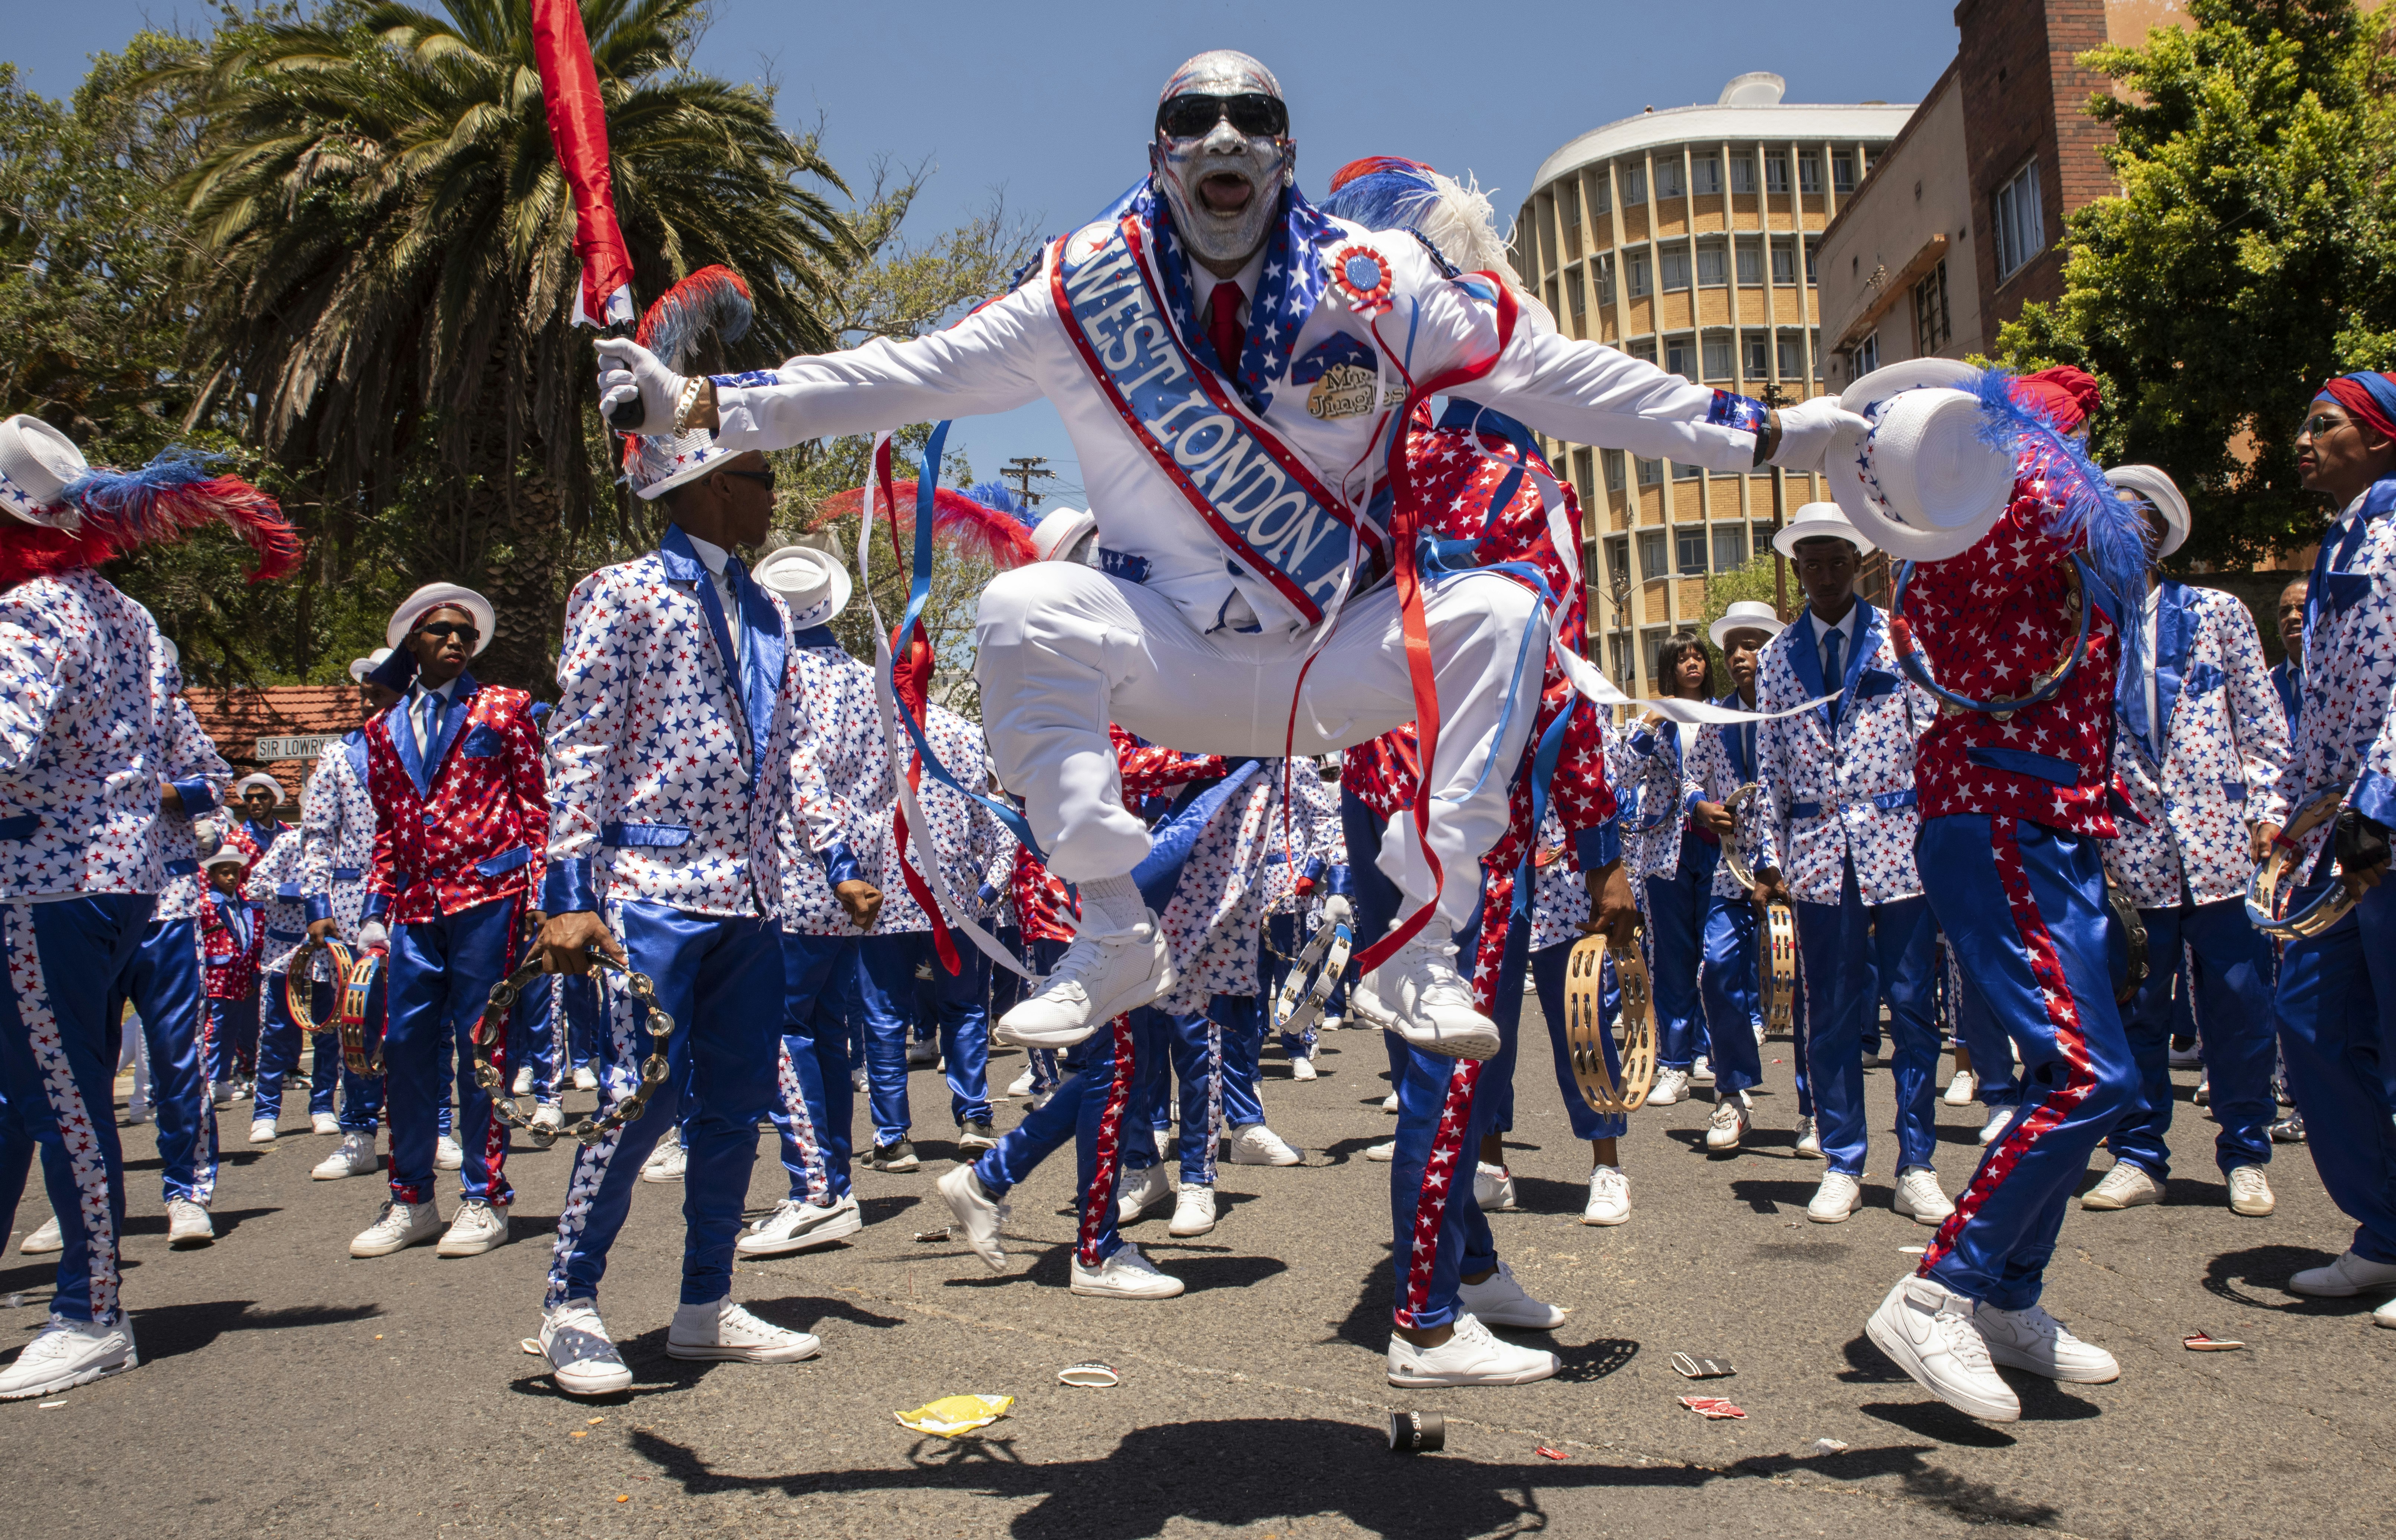 A man dressed in a white suit with a red, white and blue sash at the Cape Town Street Parade